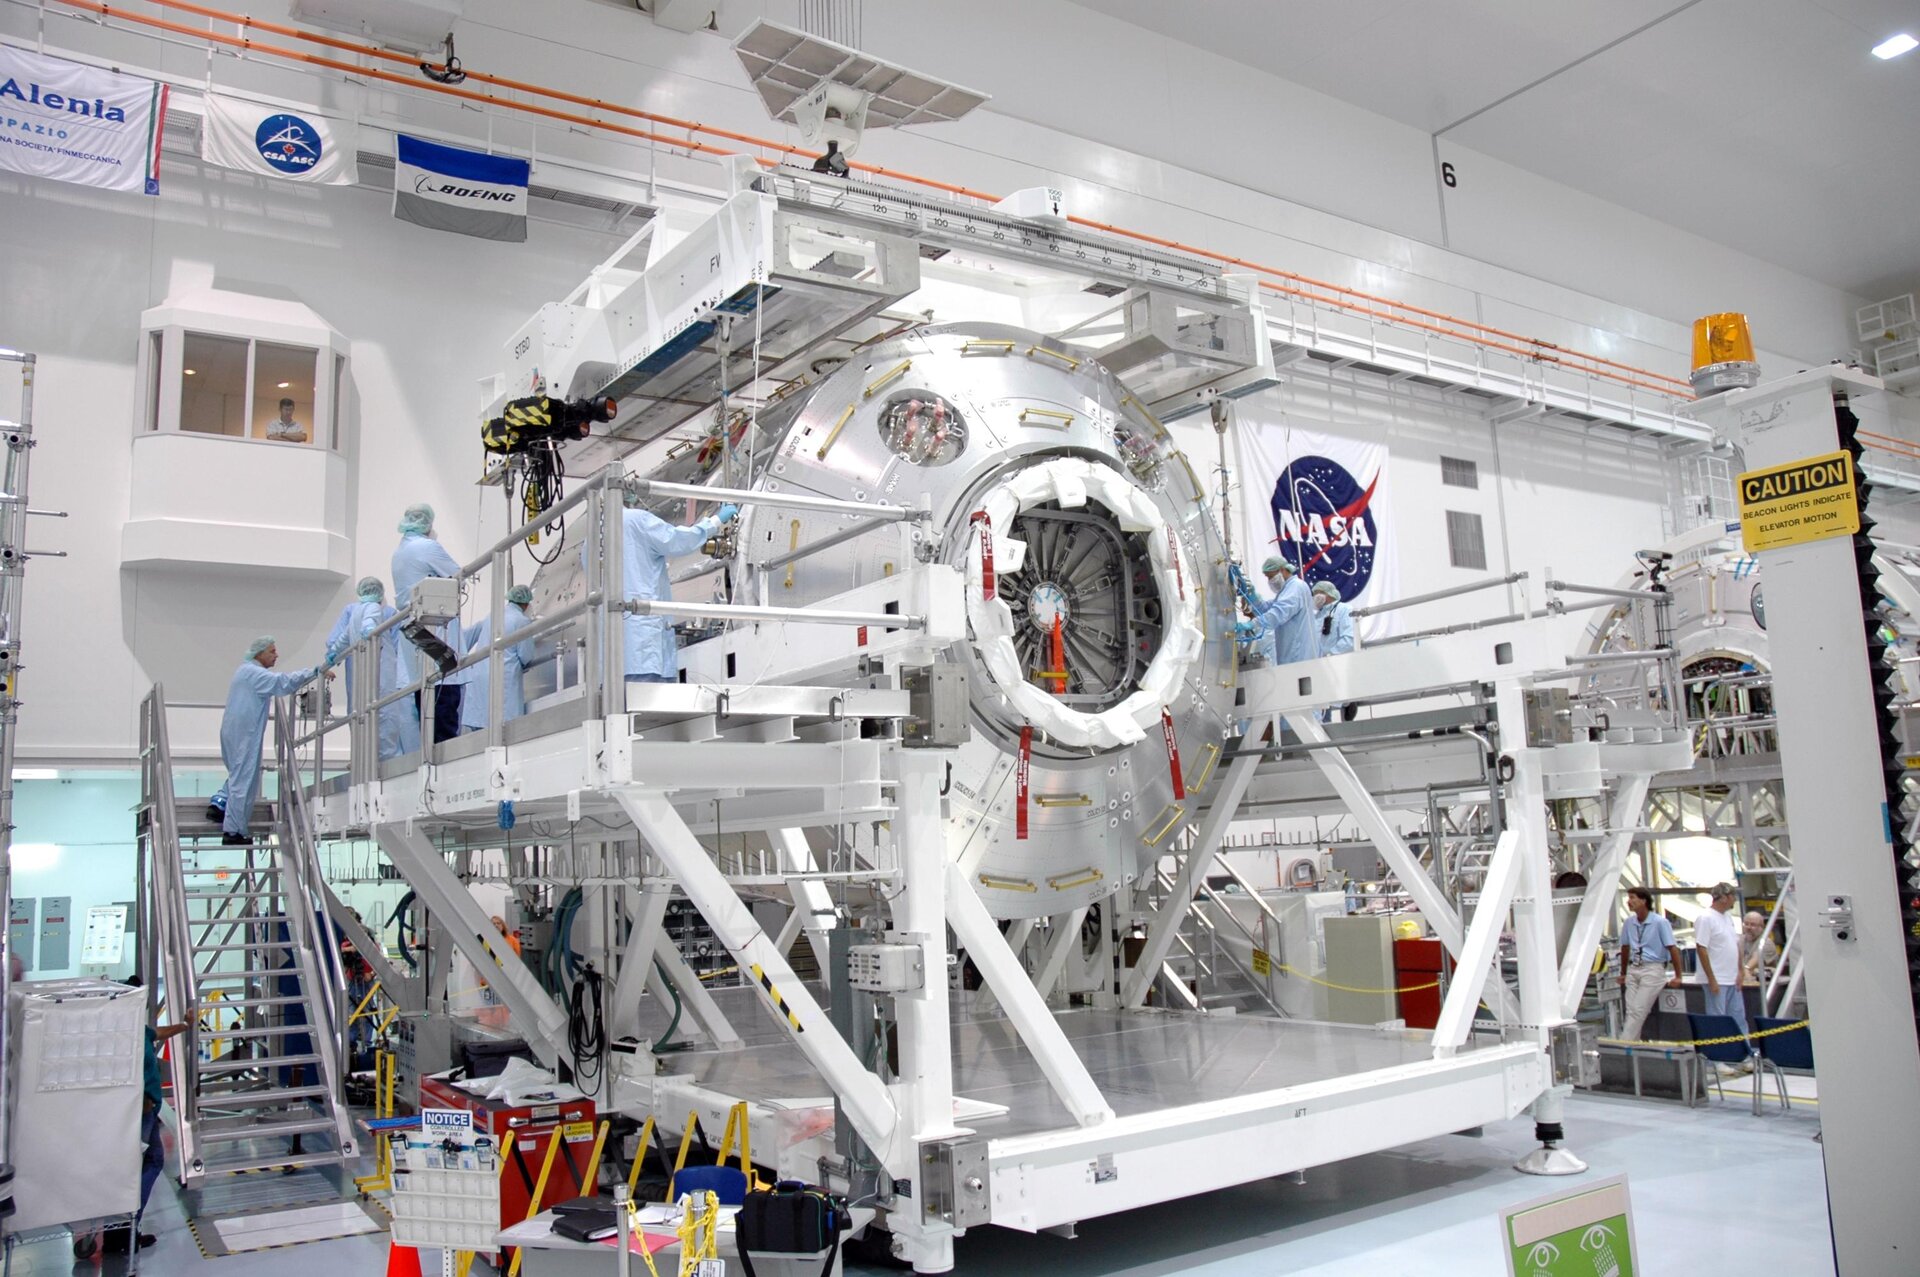 The European Columbus module is prepared in the Space Station Processing Facility at KSC